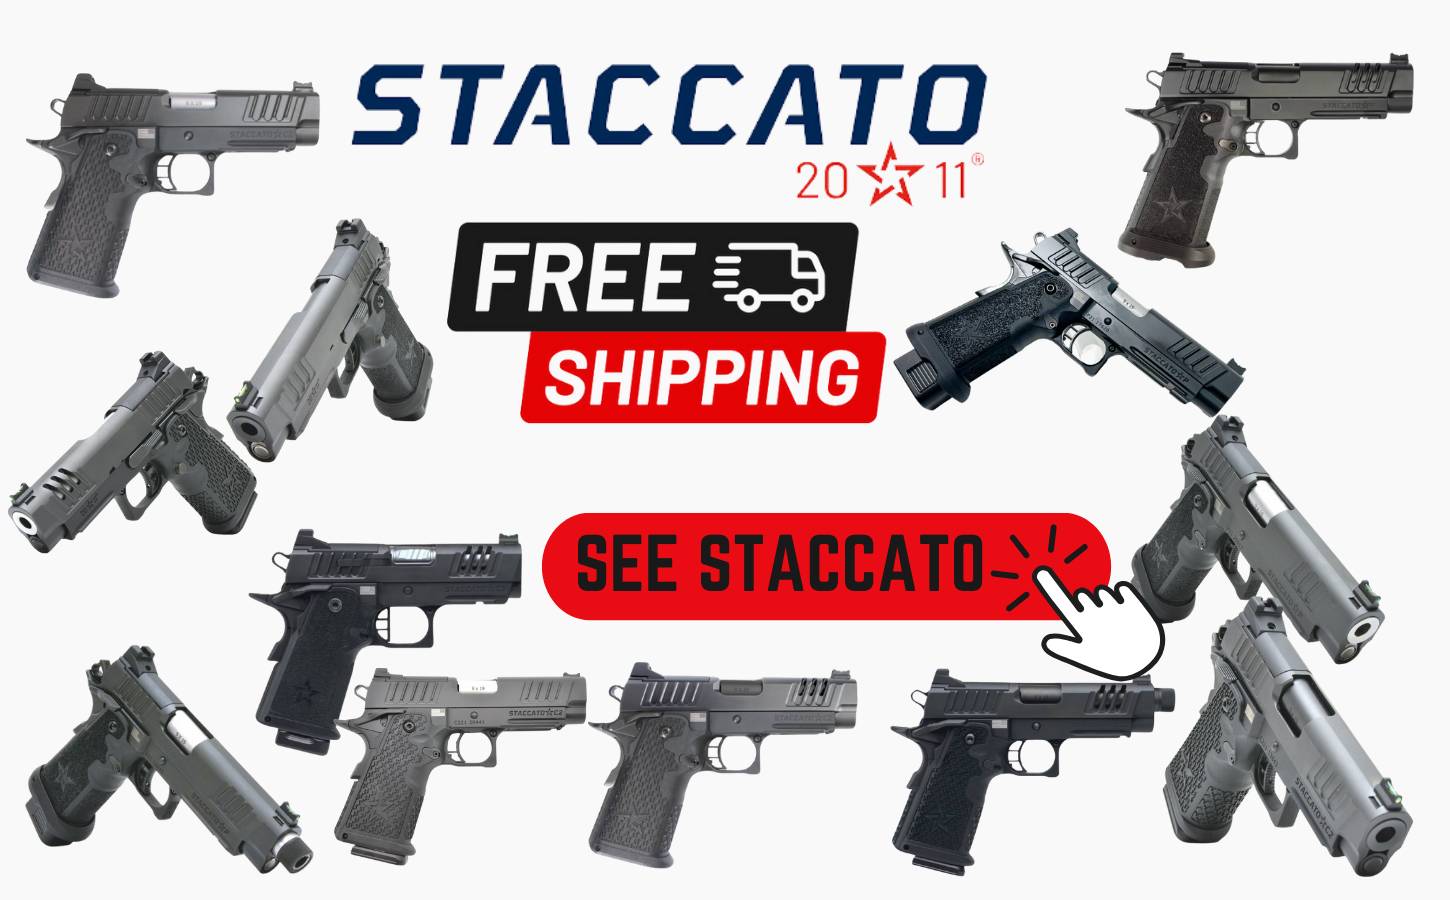 STACCATO FREE AMMO